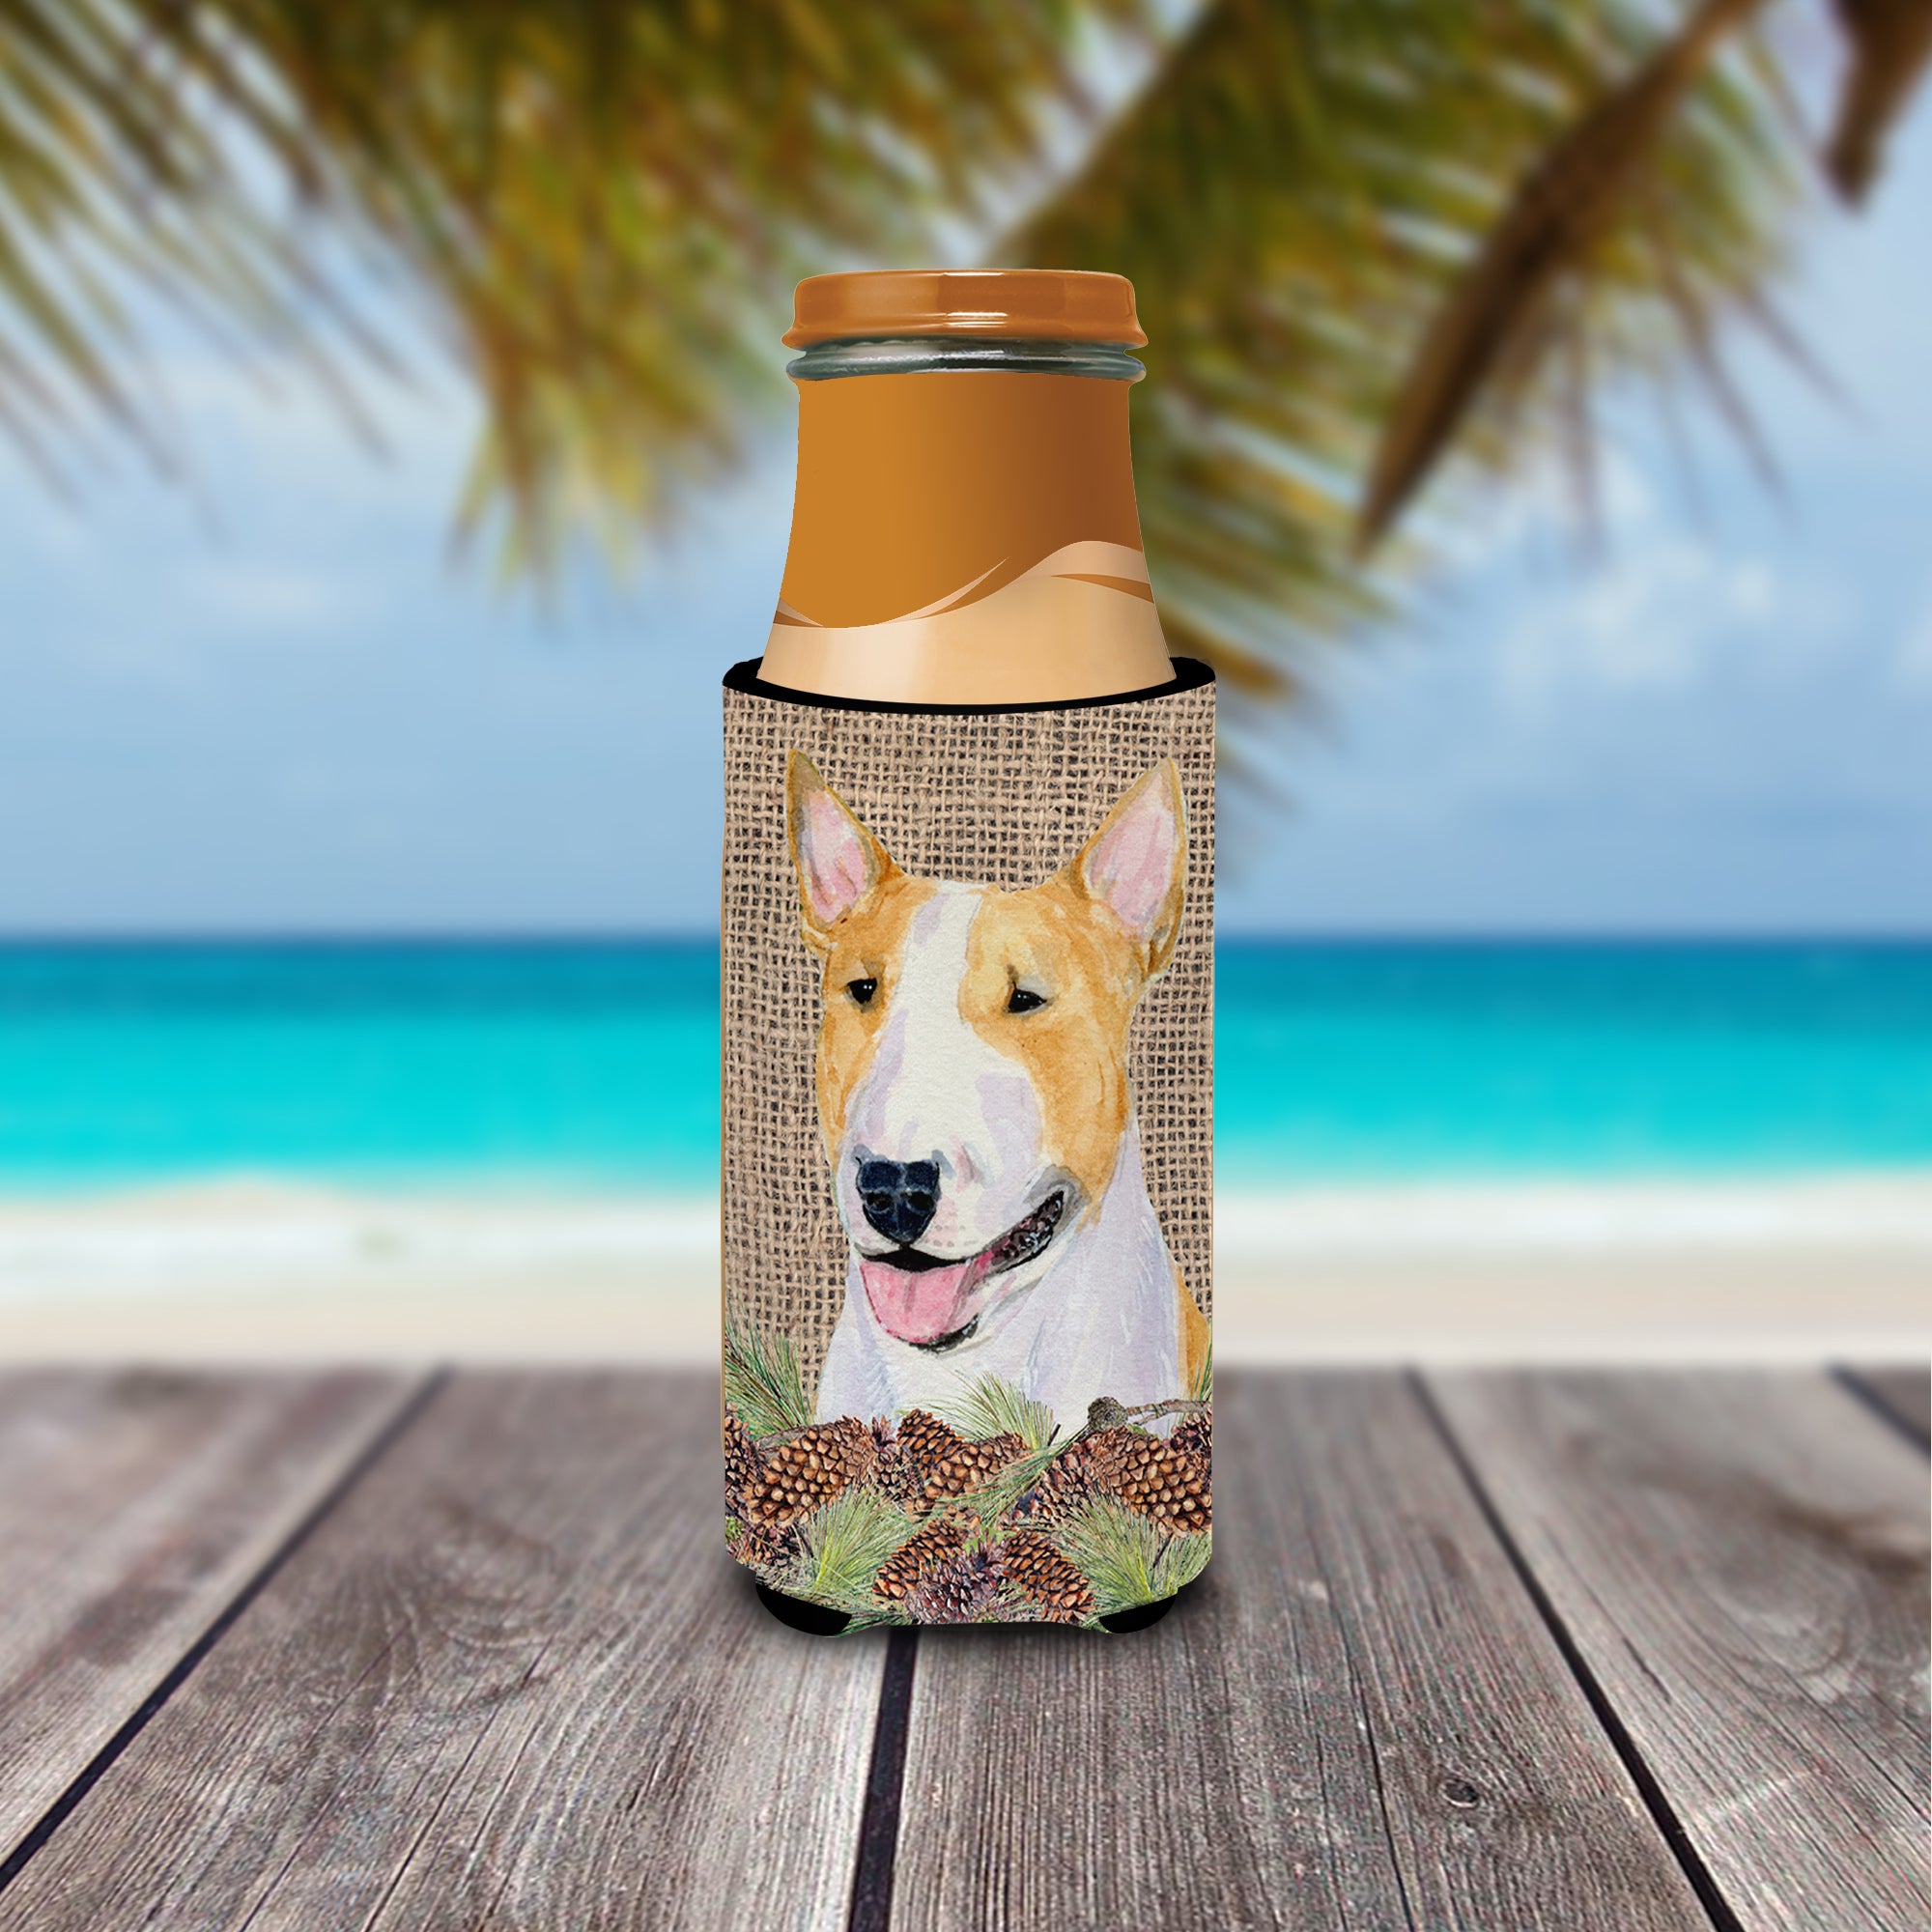 Bull Terrier on Faux Burlap with Pine Cones Ultra Beverage Insulators for slim cans SS4086MUK.